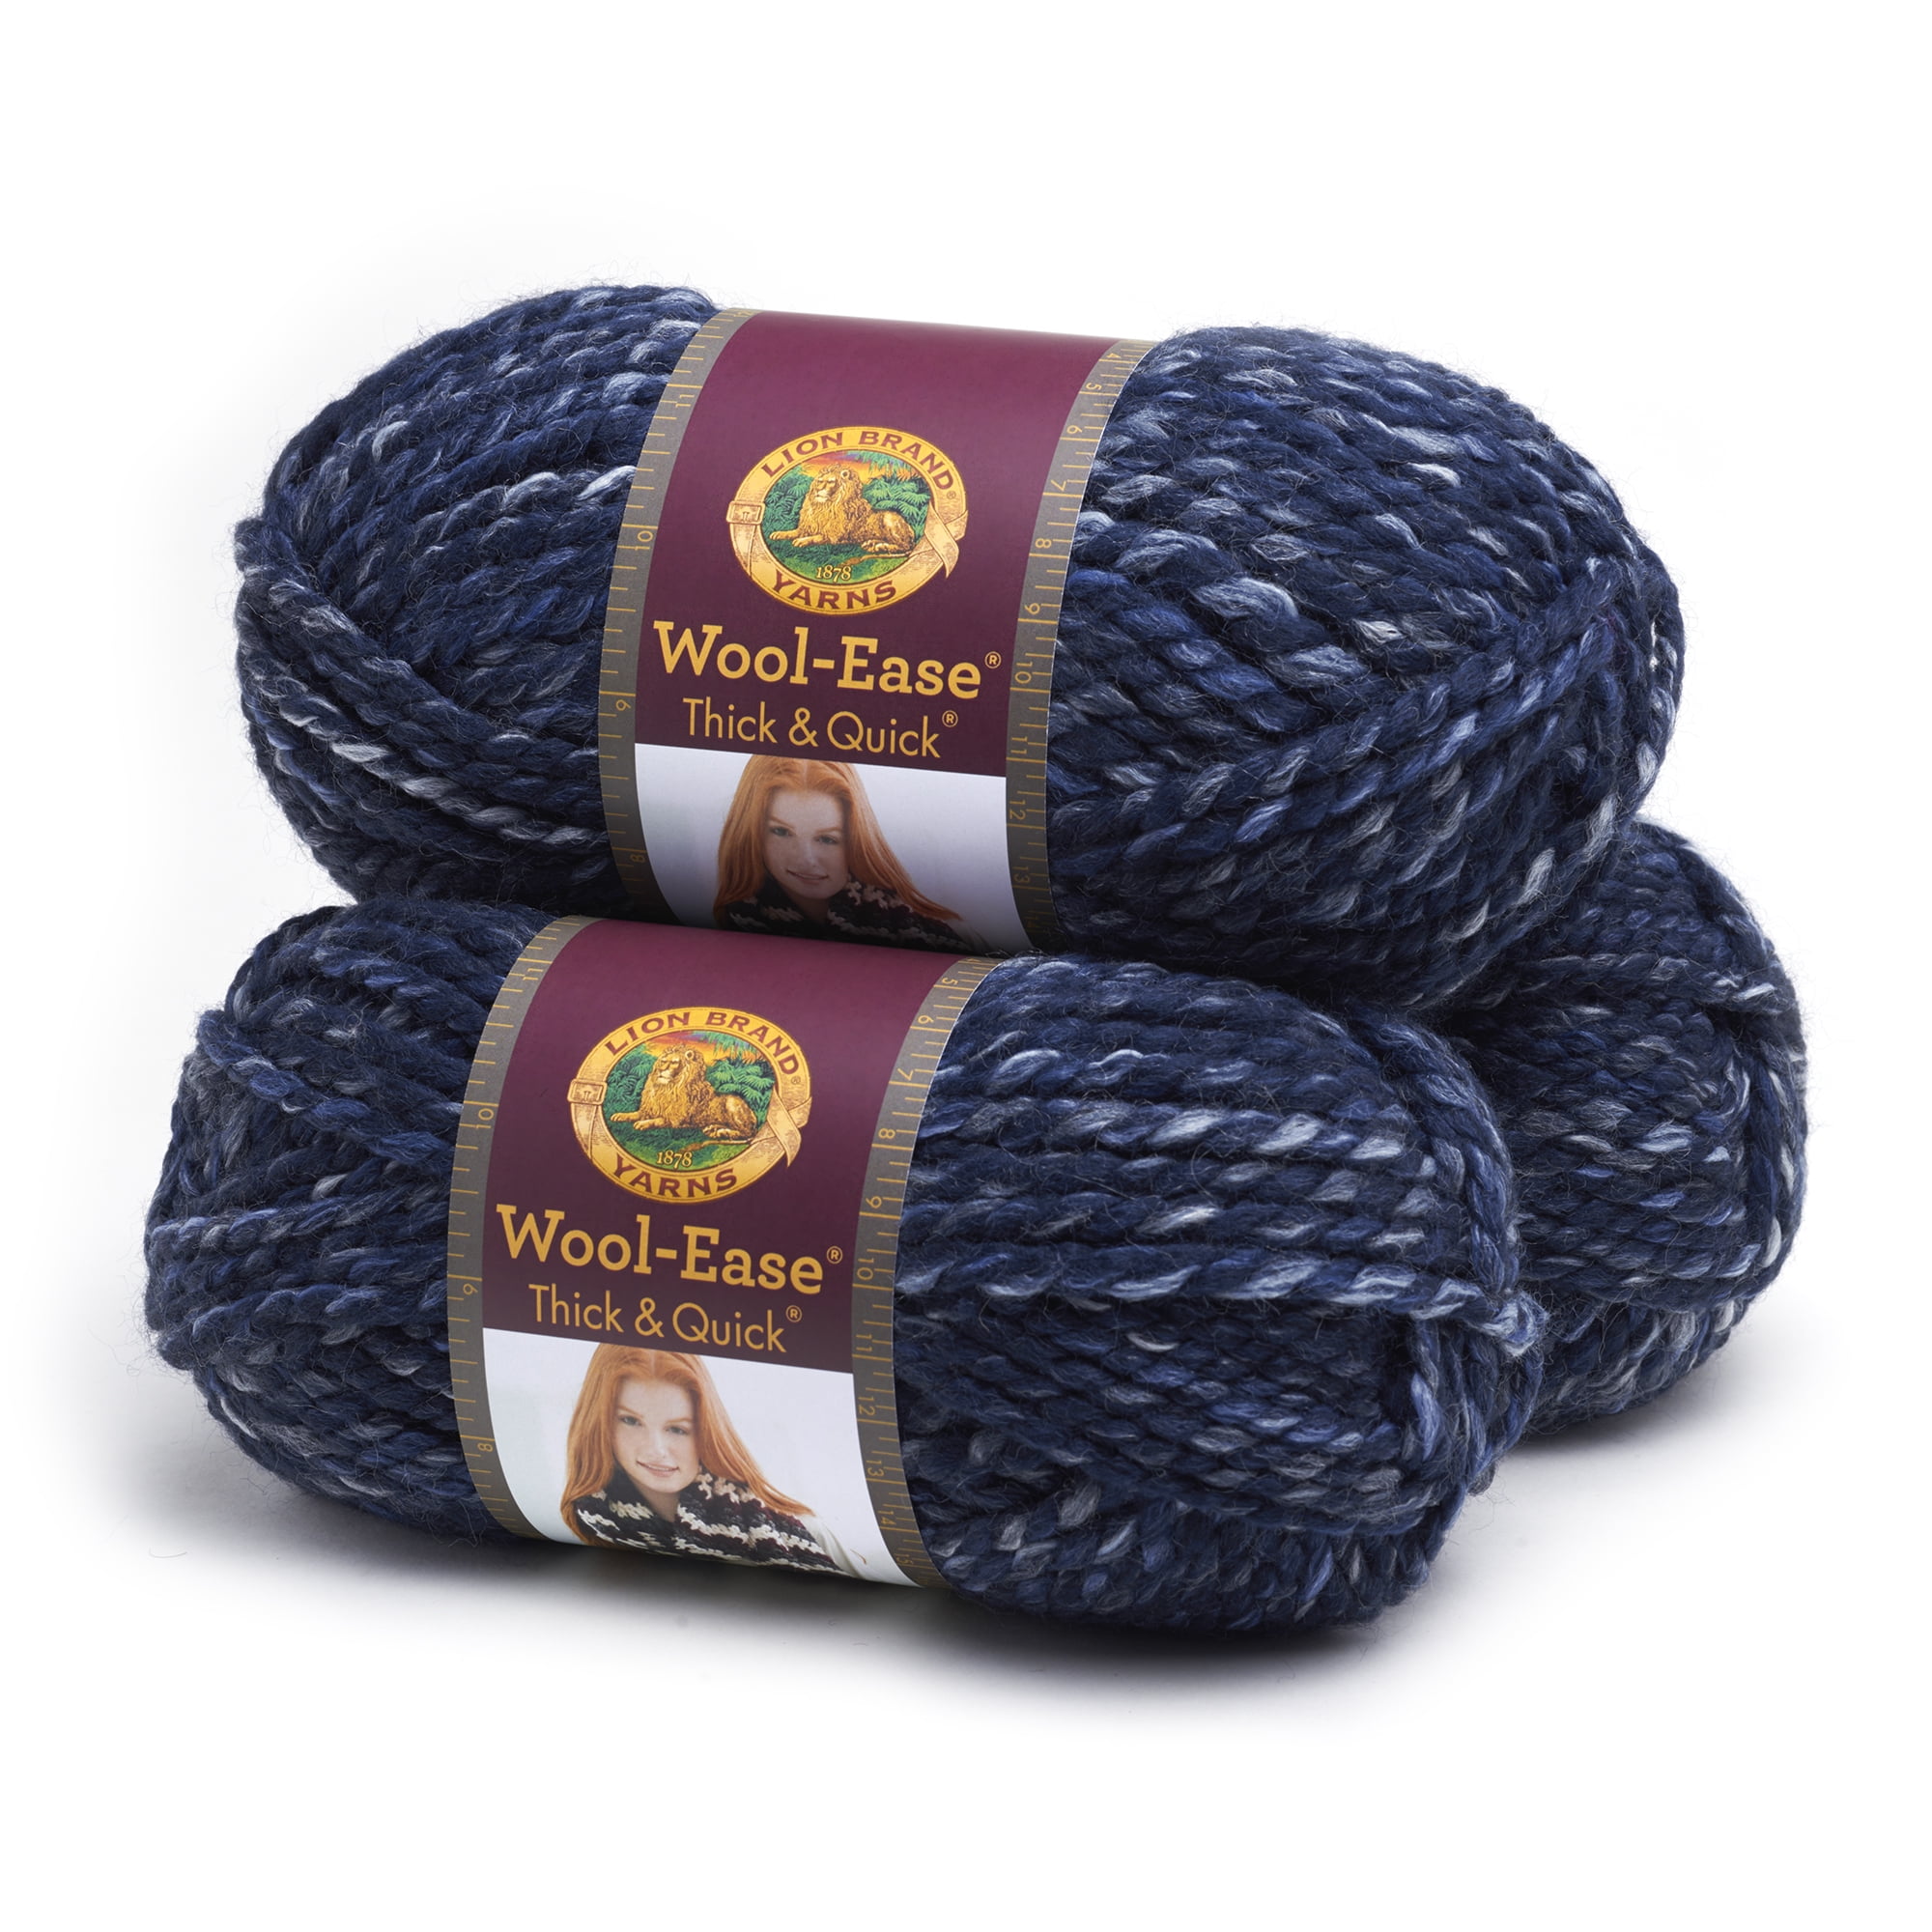 (3 Pack) Lion Brand Yarn 640-609 Wool-Ease Thick and Quick Yarn, Moonlight